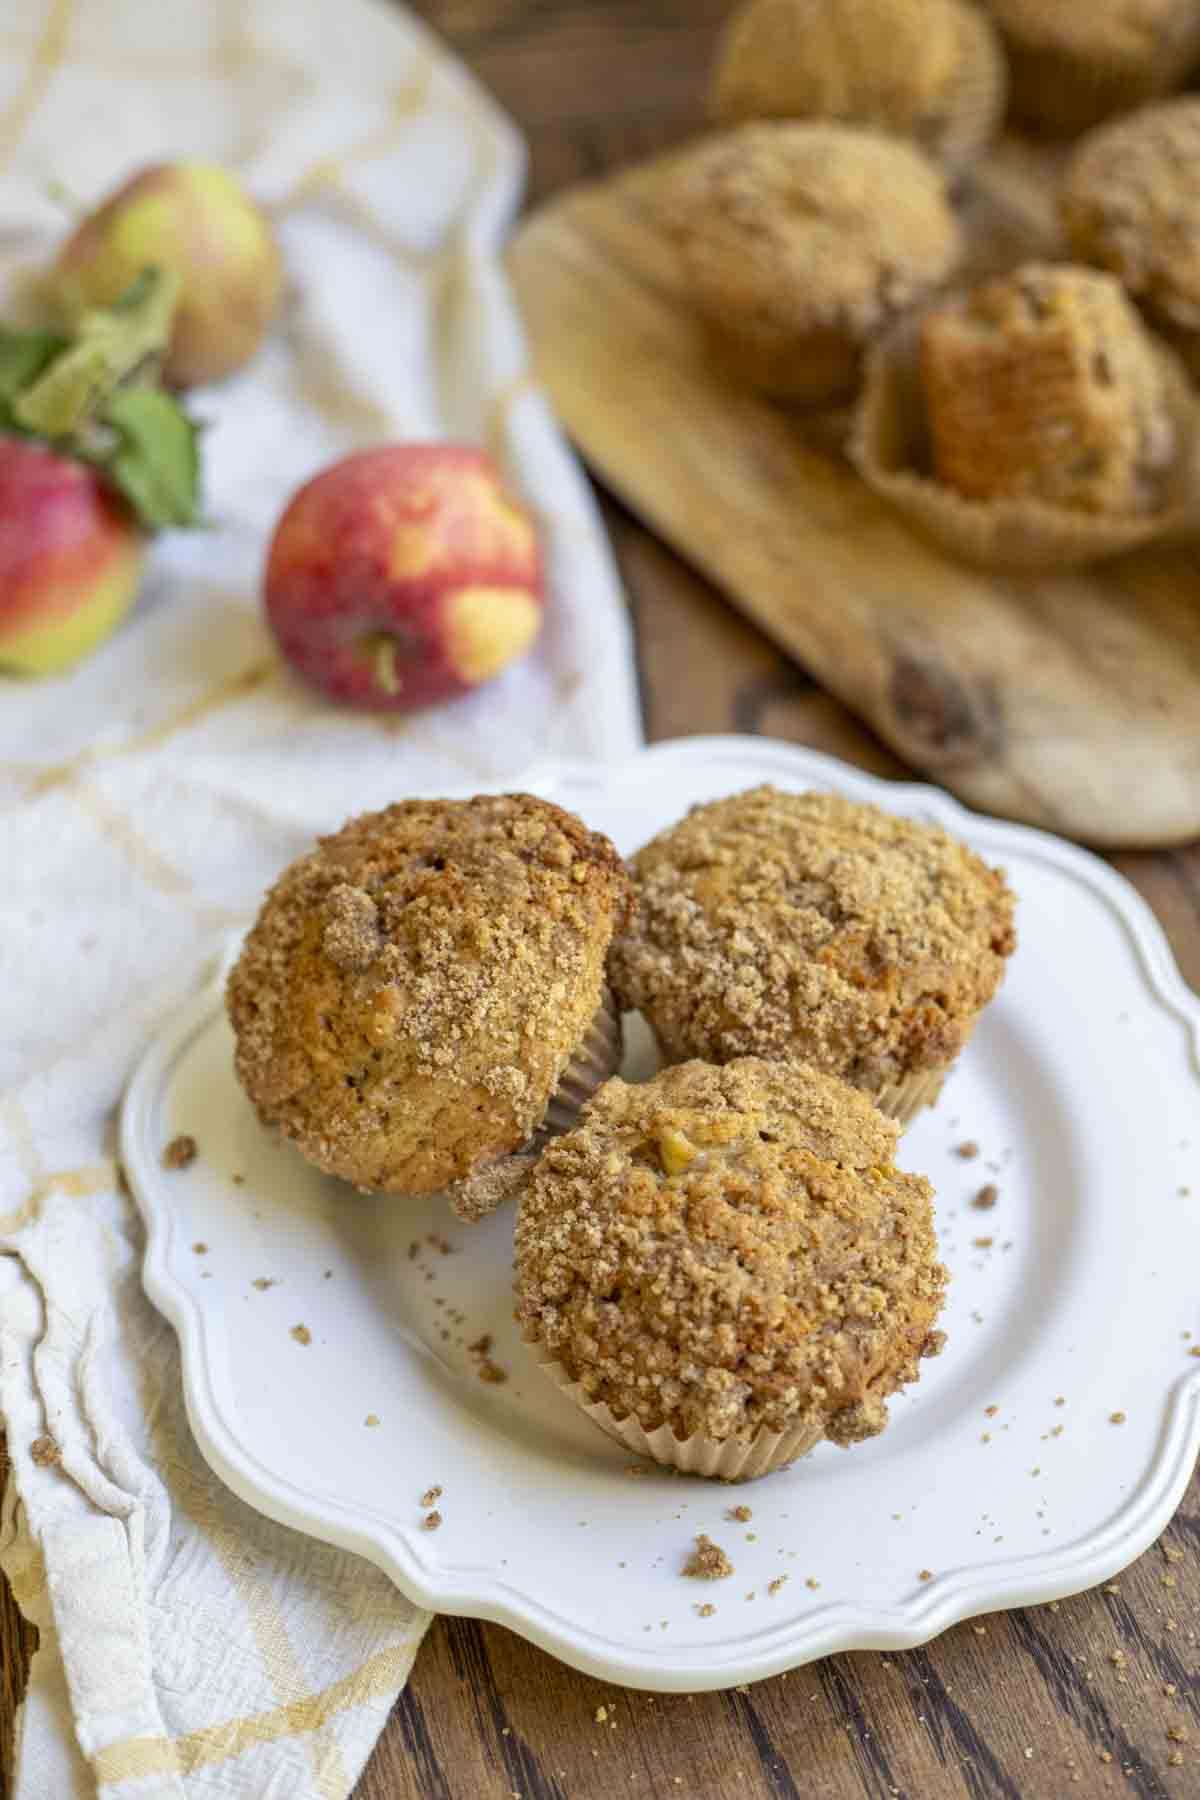 three sourdough apple muffins with a crumble topping on a white plate on a wood table with a yellow and white towel, apples, and more muffins on a cutting board in the background